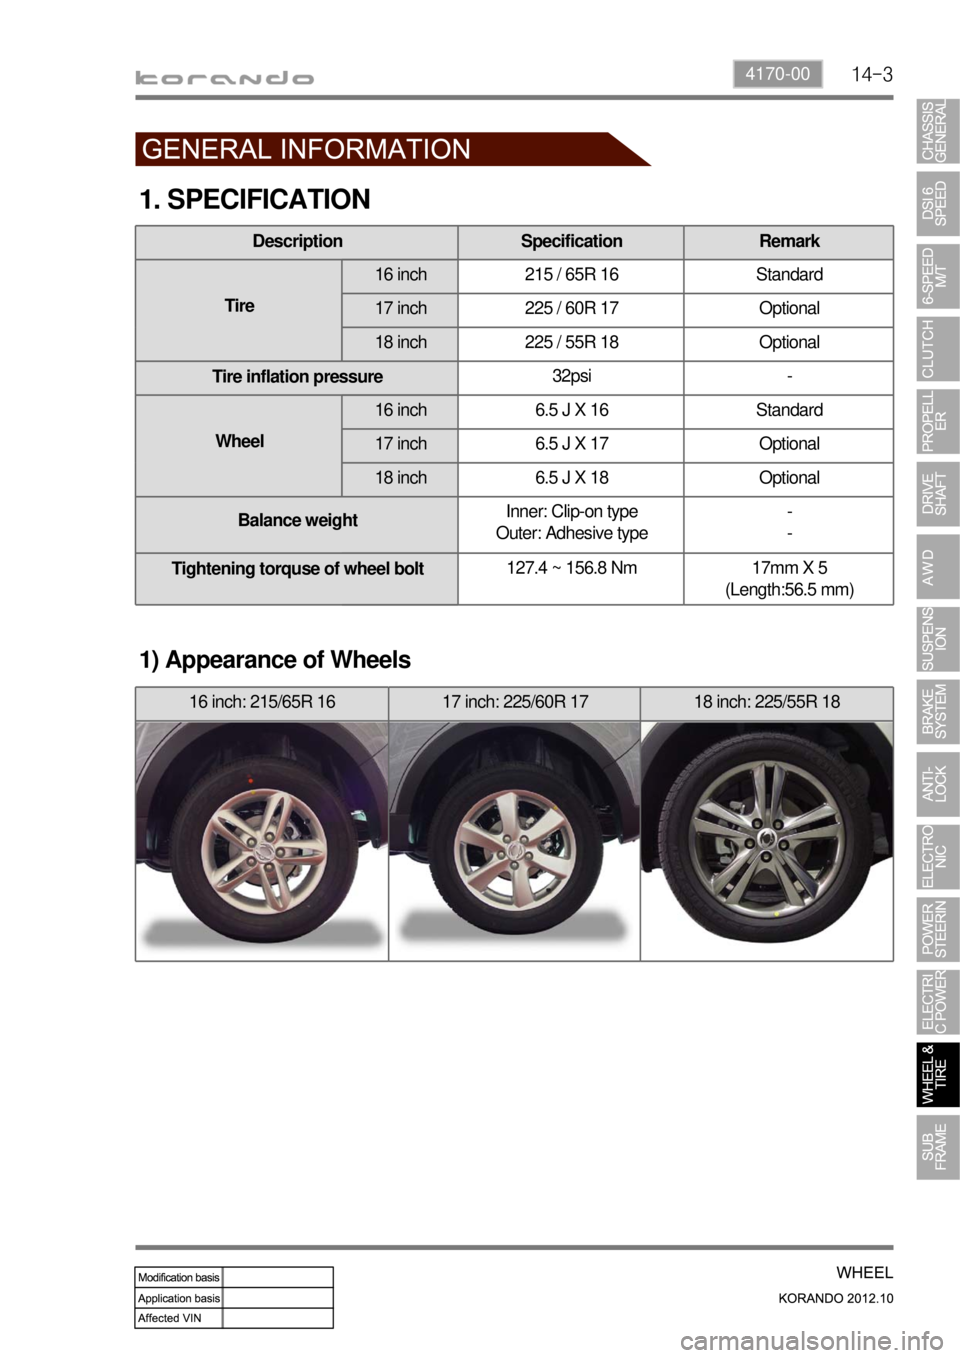 SSANGYONG KORANDO 2012  Service Manual 14-34170-00
1. SPECIFICATION
1) Appearance of Wheels
16 inch: 215/65R 16 17 inch: 225/60R 17 18 inch: 225/55R 18
Description Specification Remark
Tire16 inch 215 / 65R 16 Standard
17 inch 225 / 60R 17